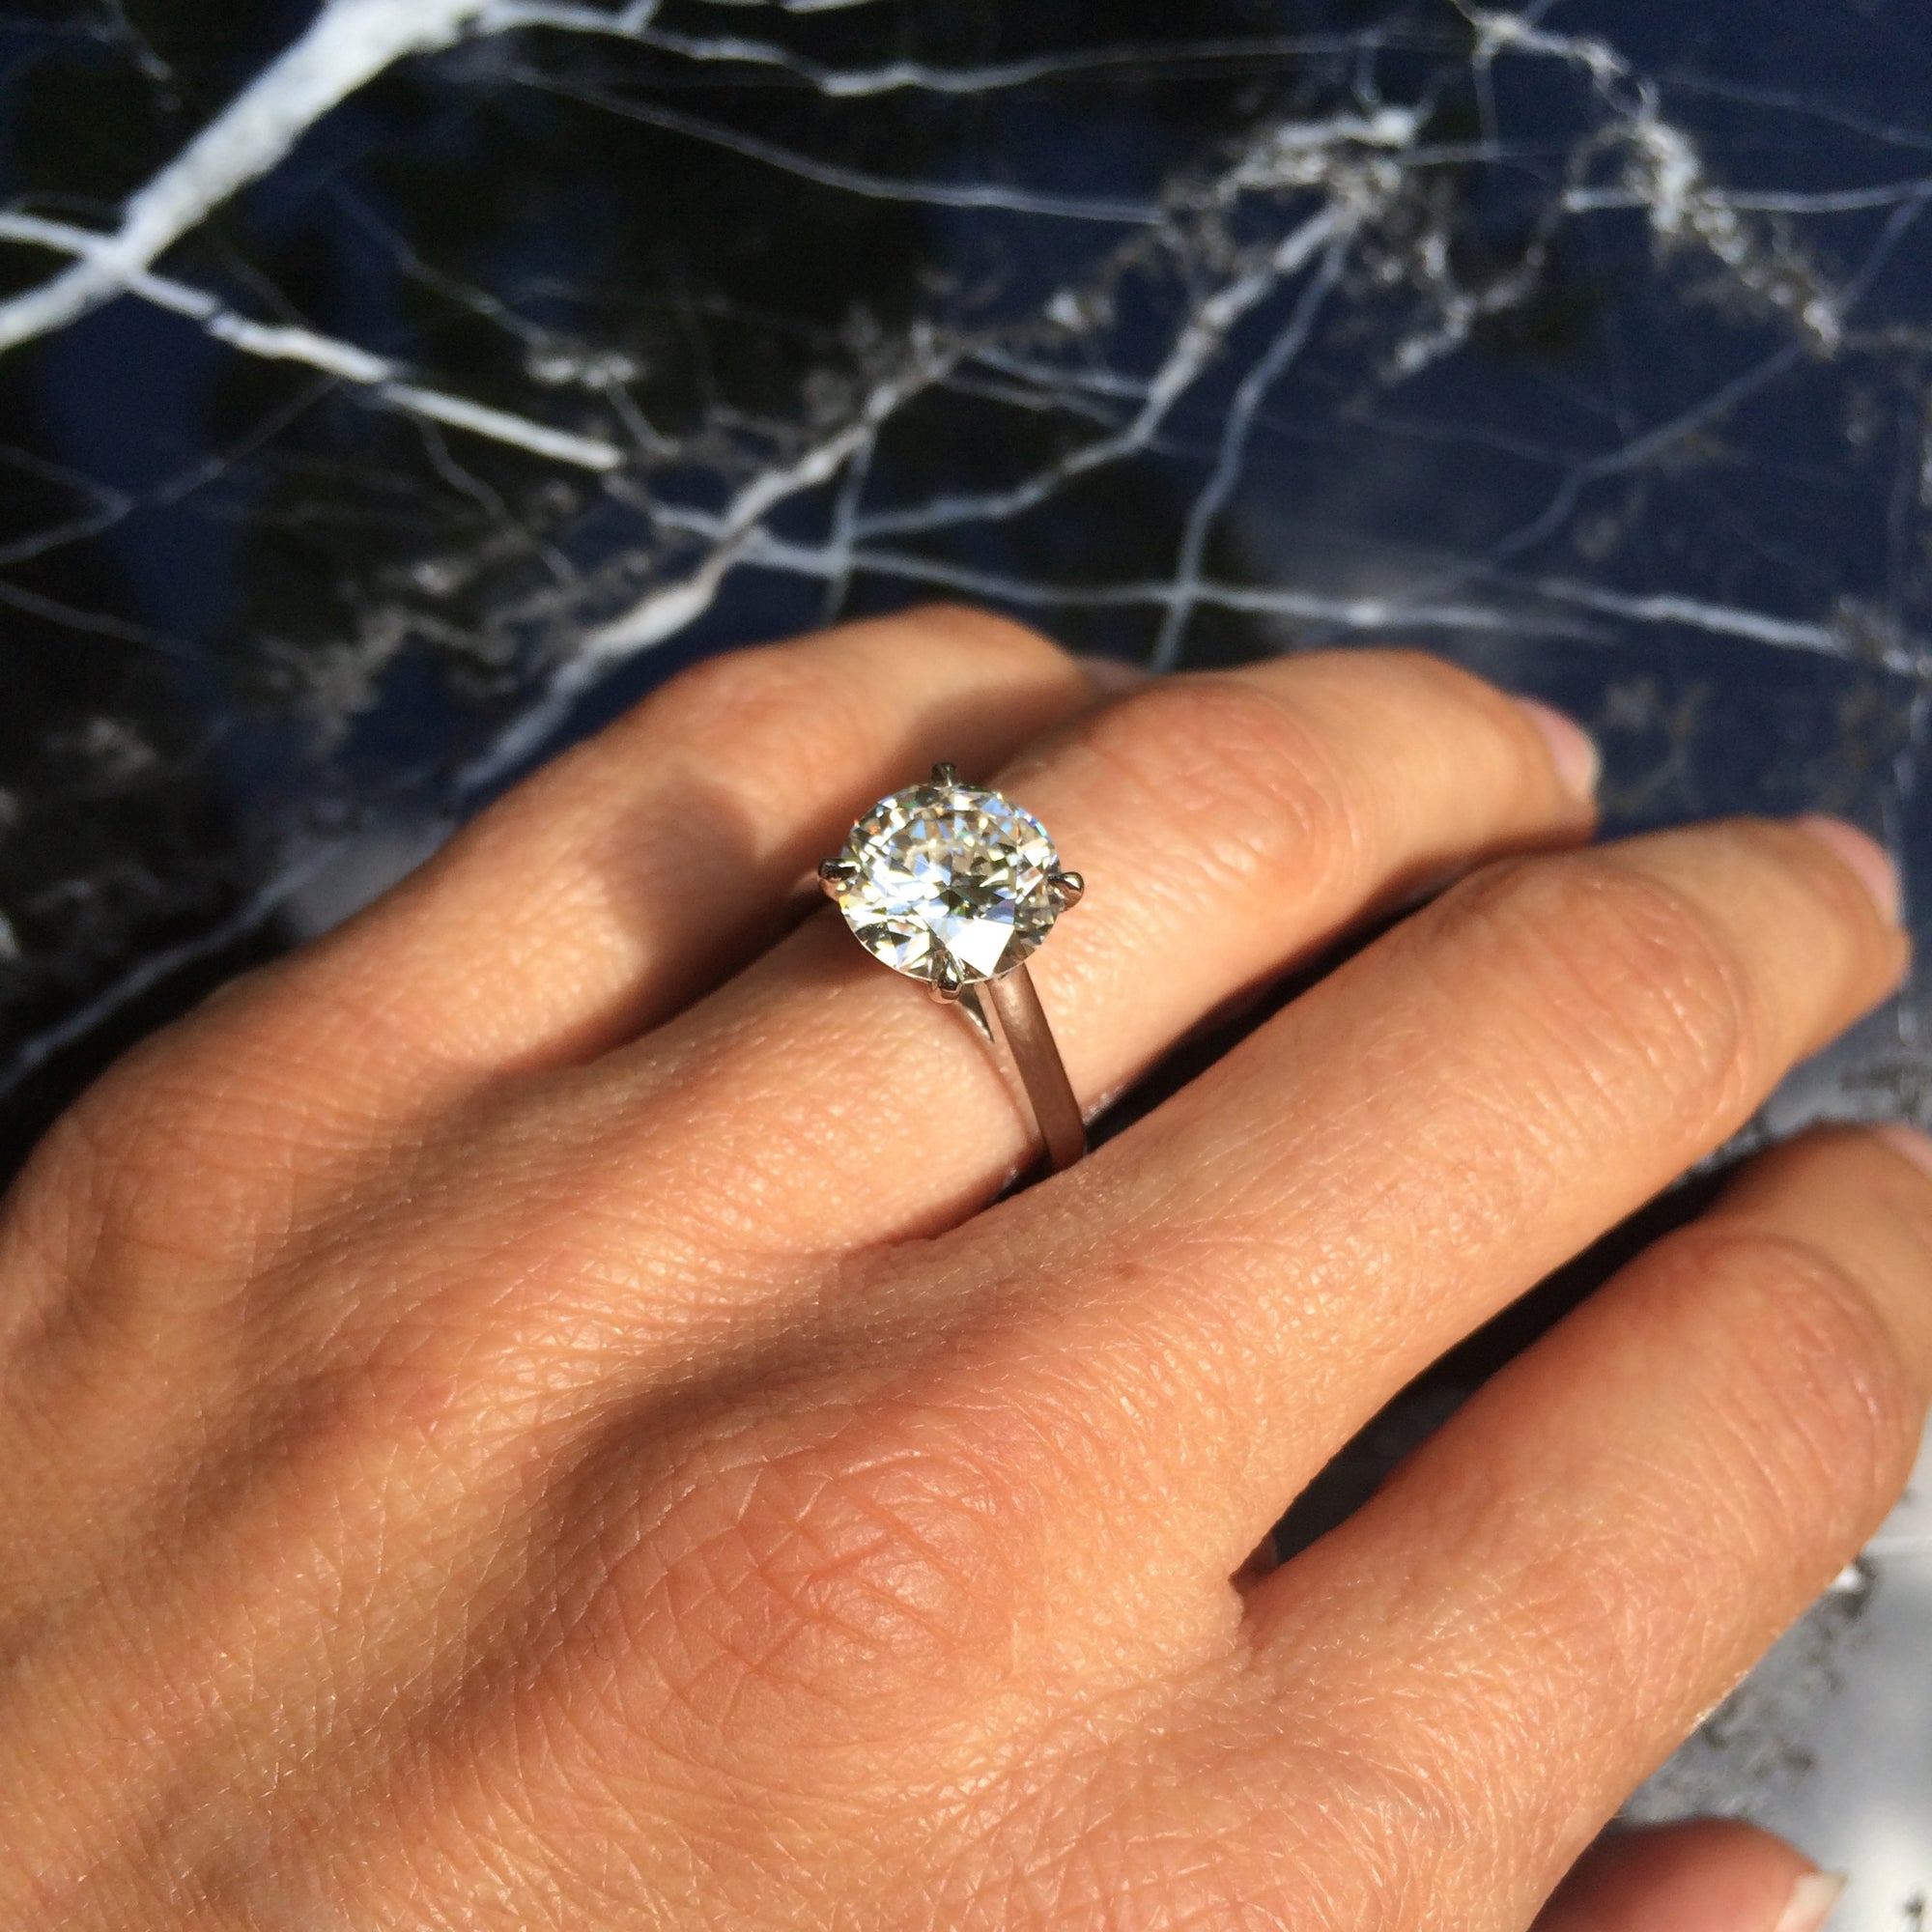 Refurbished: a bespoke engagement ring created using an old 1.5ct brilliant-cut diamond